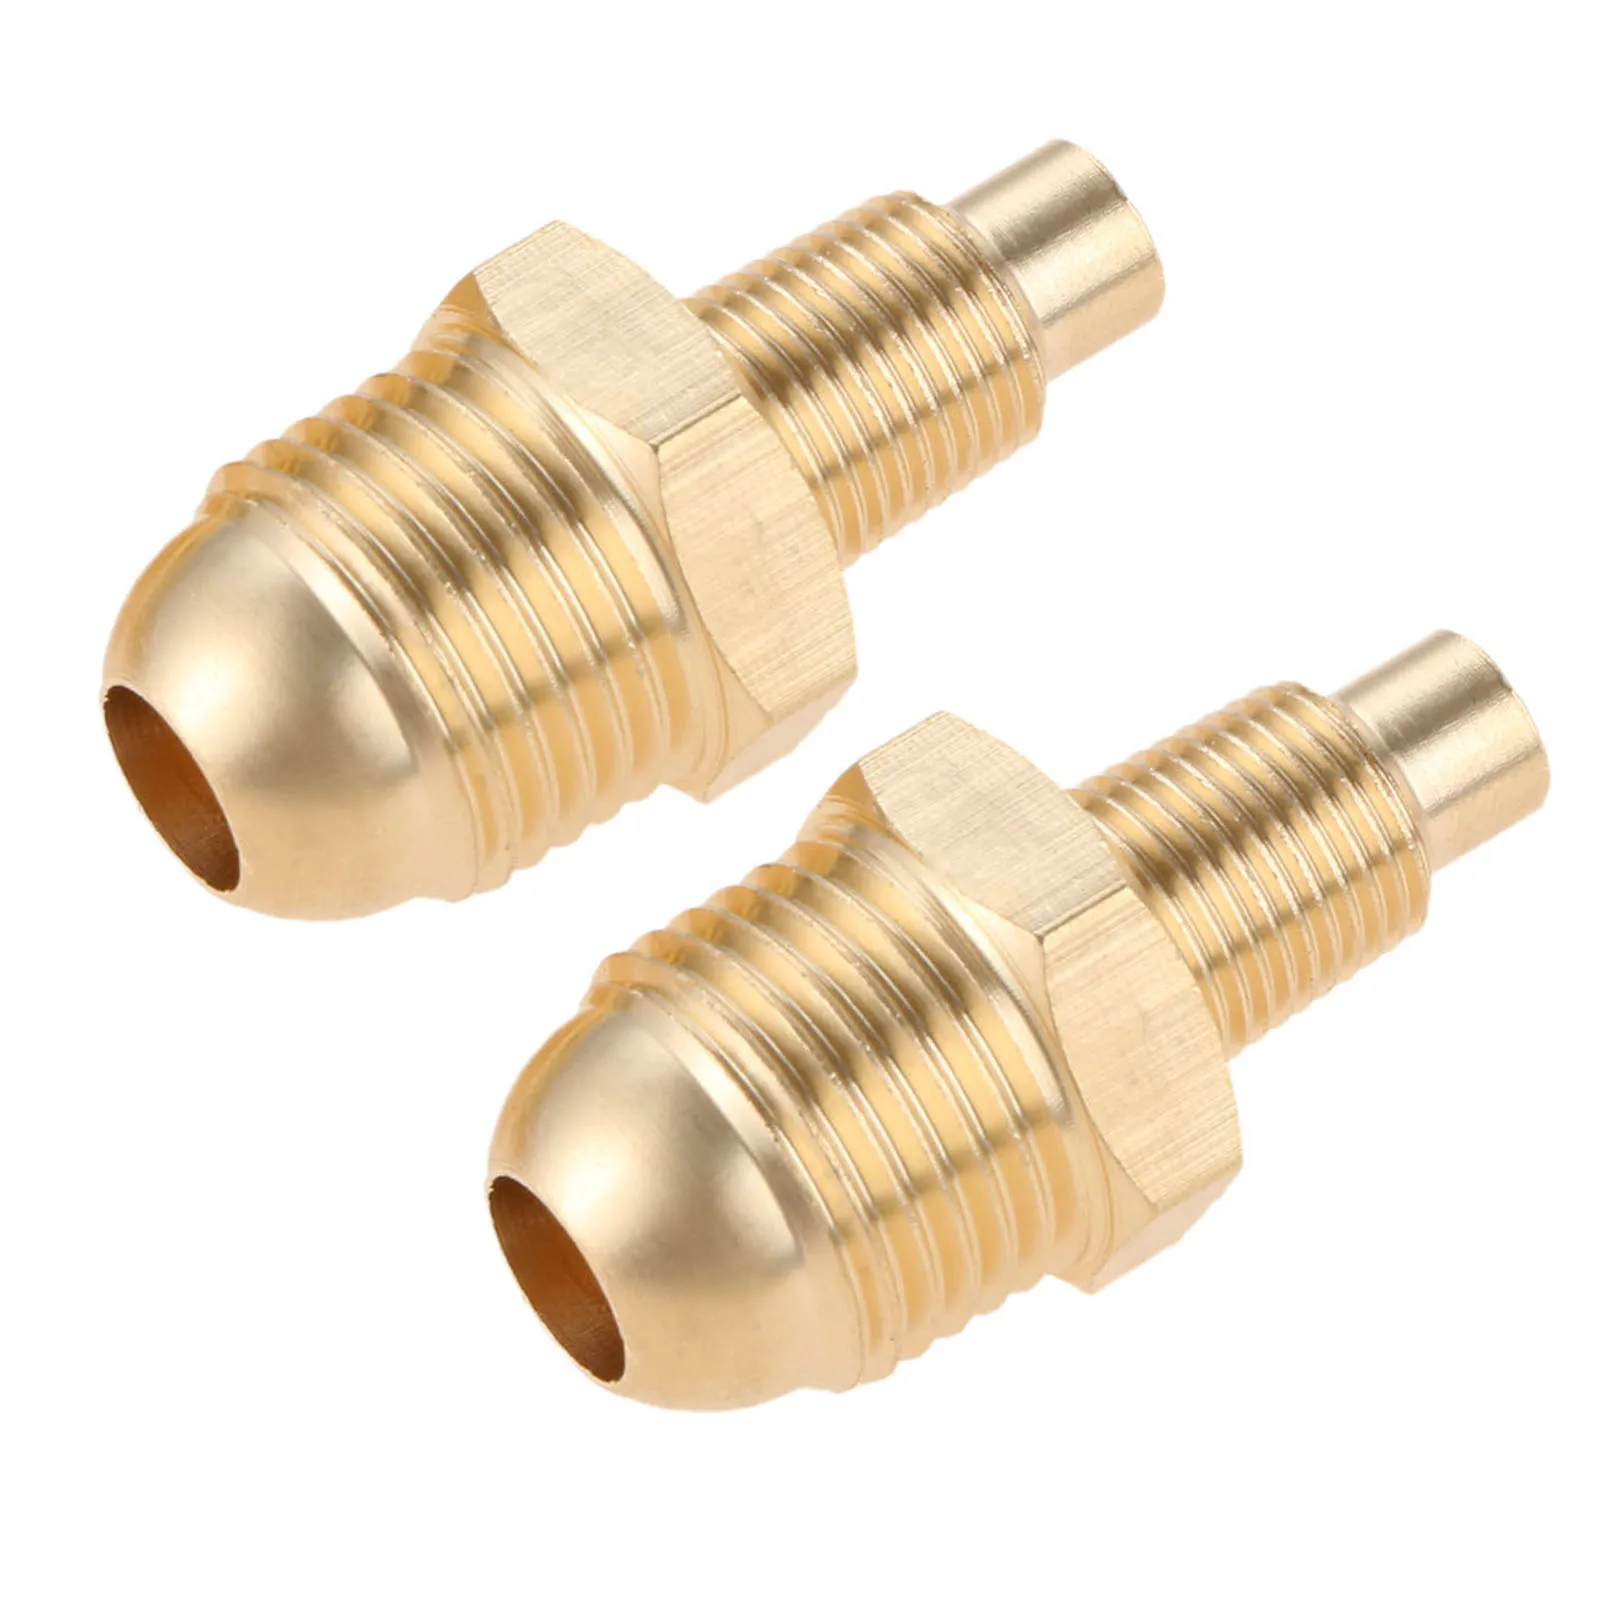 

2 Pcs Solid Brass Propane Orifice Connector Tube fits for Casting Cooking Stove Grill Turkey Pot Cooker 3/8" Flare x1/8" Mnpt